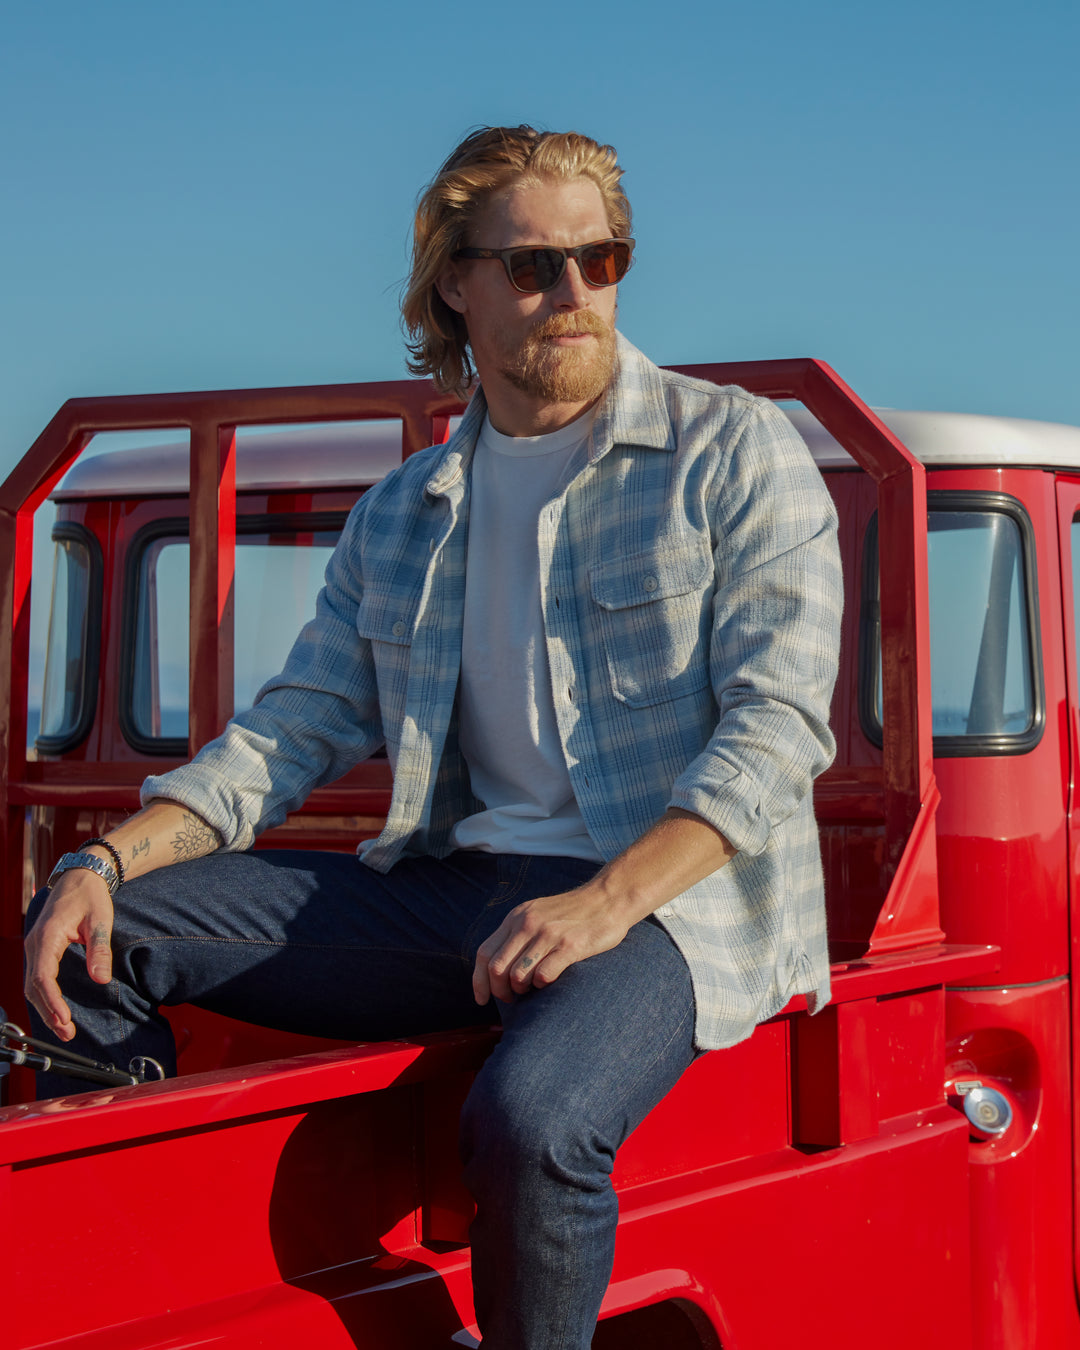 Lifestyle-oriented model sitting on the bed of a cherry red Volkswagen Van pickup conversion with a slight leftward gaze wearing sunglasses, f Ace Rivington soft-brushed flannel shirt with pearl buttons and off-white and light blue and black checkered grid plaid design with pearl buttons and double breast pockets with buttoned enclosure, and pair of Ace Rivington dark clean denim jeans with dark, rich indigo color and no fabric wear